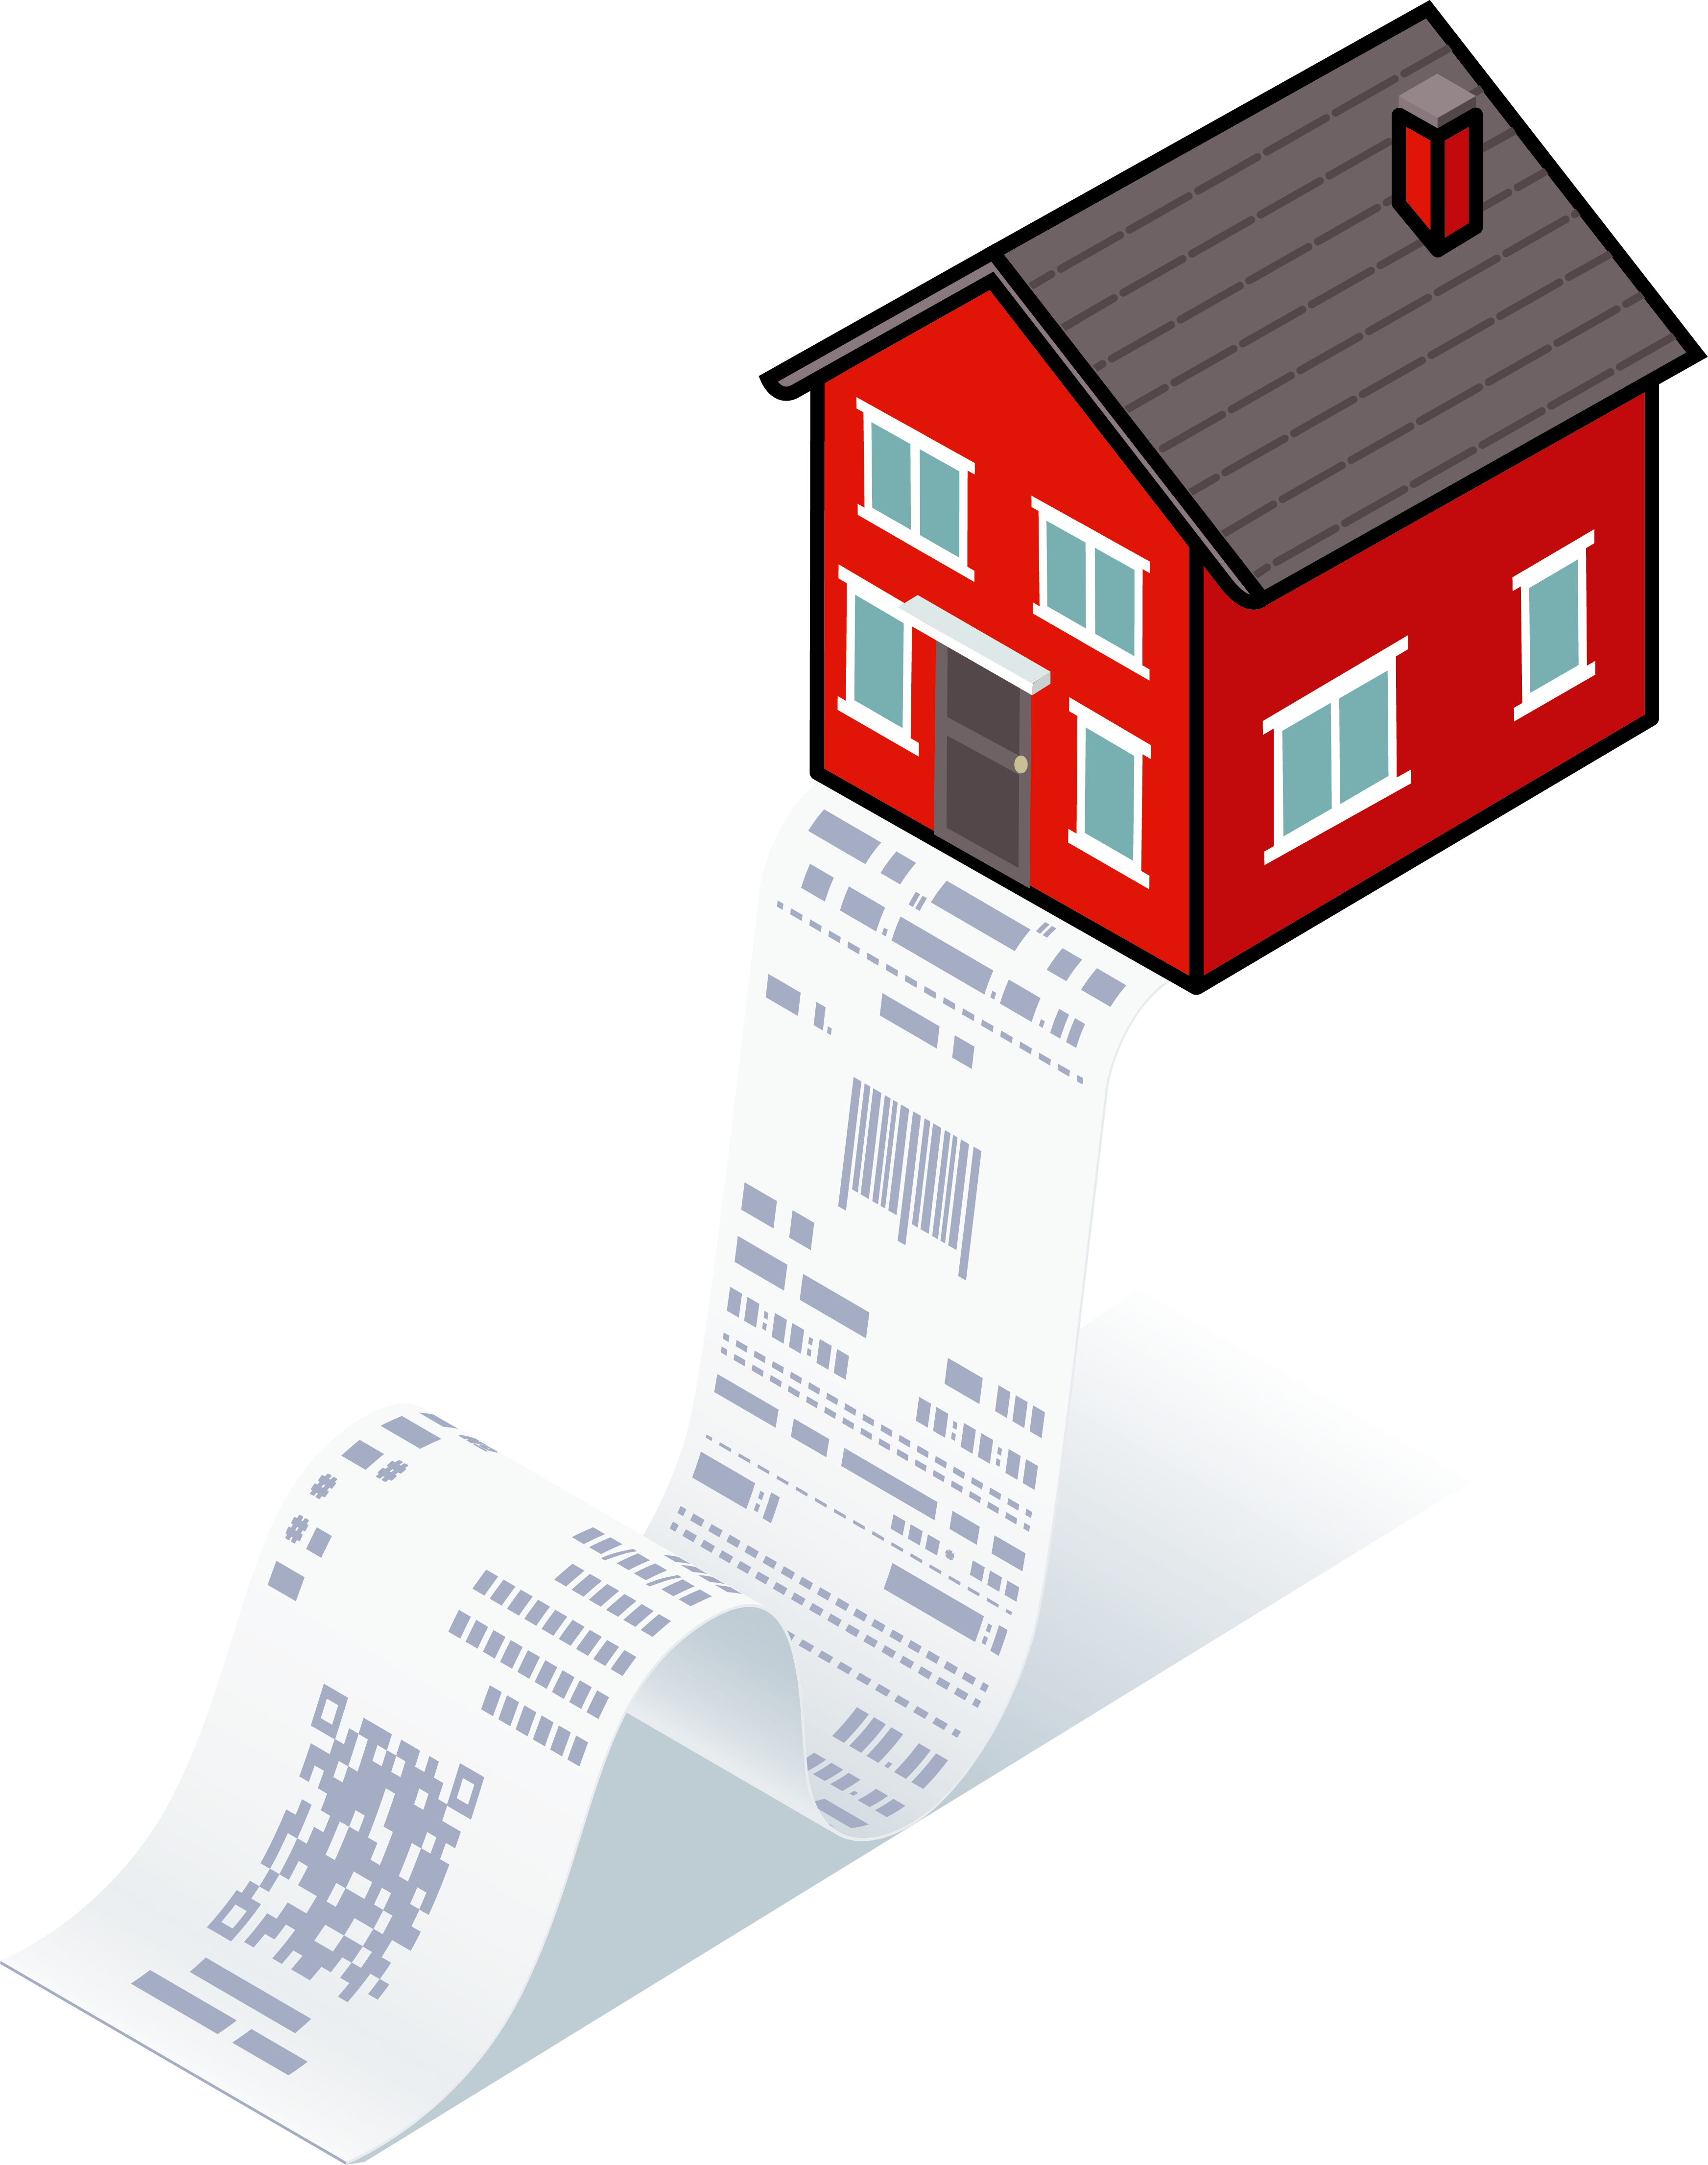 A receipt coming out of a house